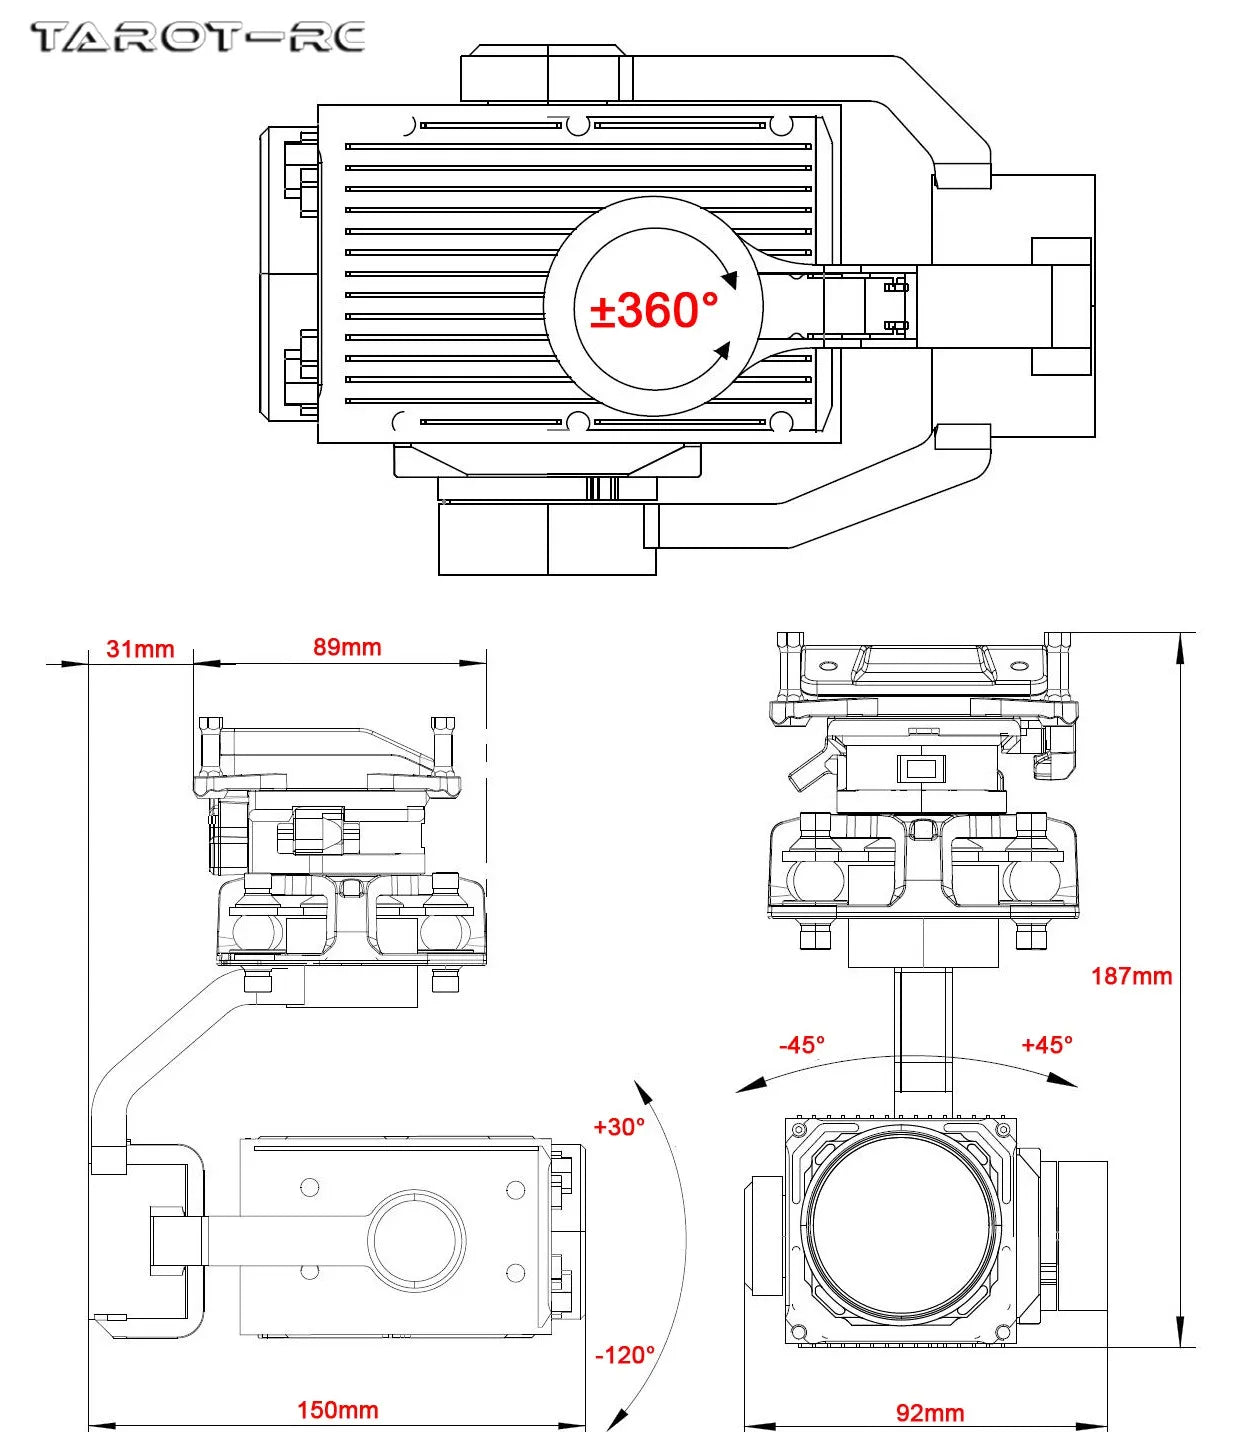 the pod adopts professional three-axis mechanical stabilization technology . the image stabilization